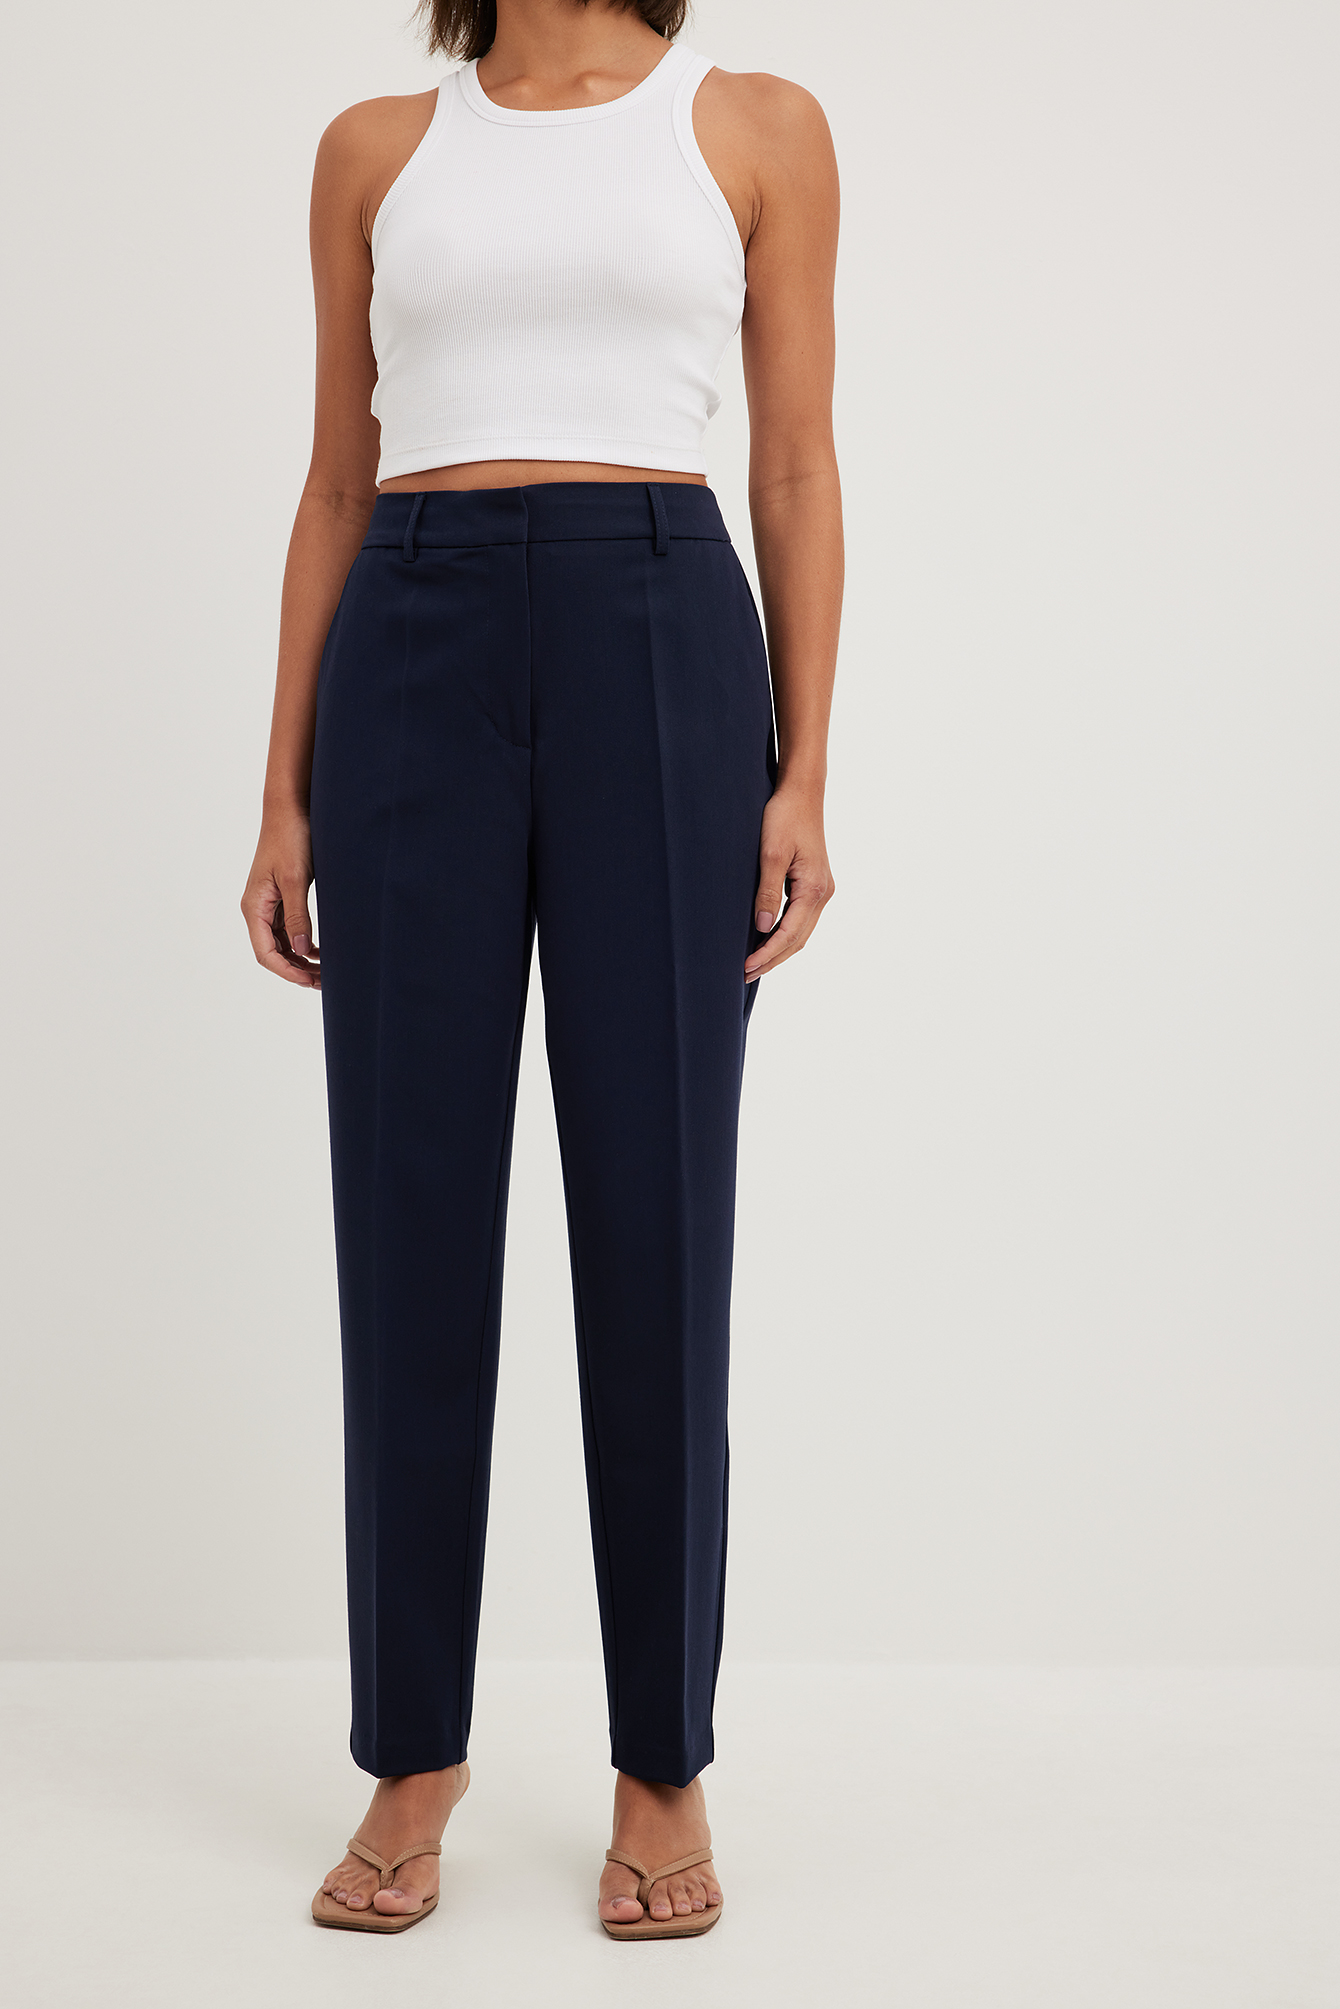 Straight High Waist Cropped Suit Pants Black